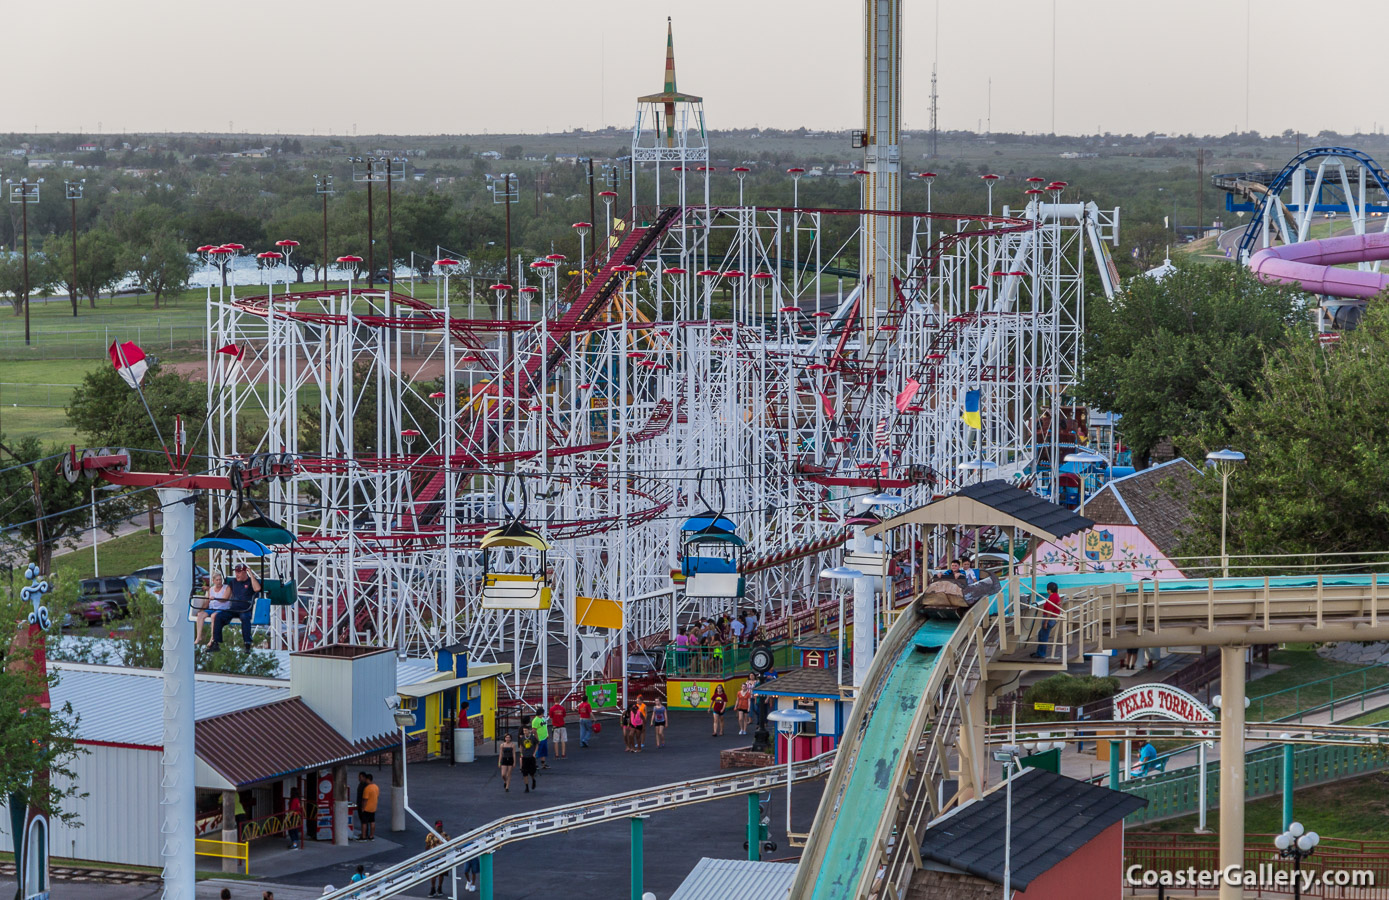 Aerial view of the Mouse Trap Coaster and green Hornet at Wonderland Amusement Park